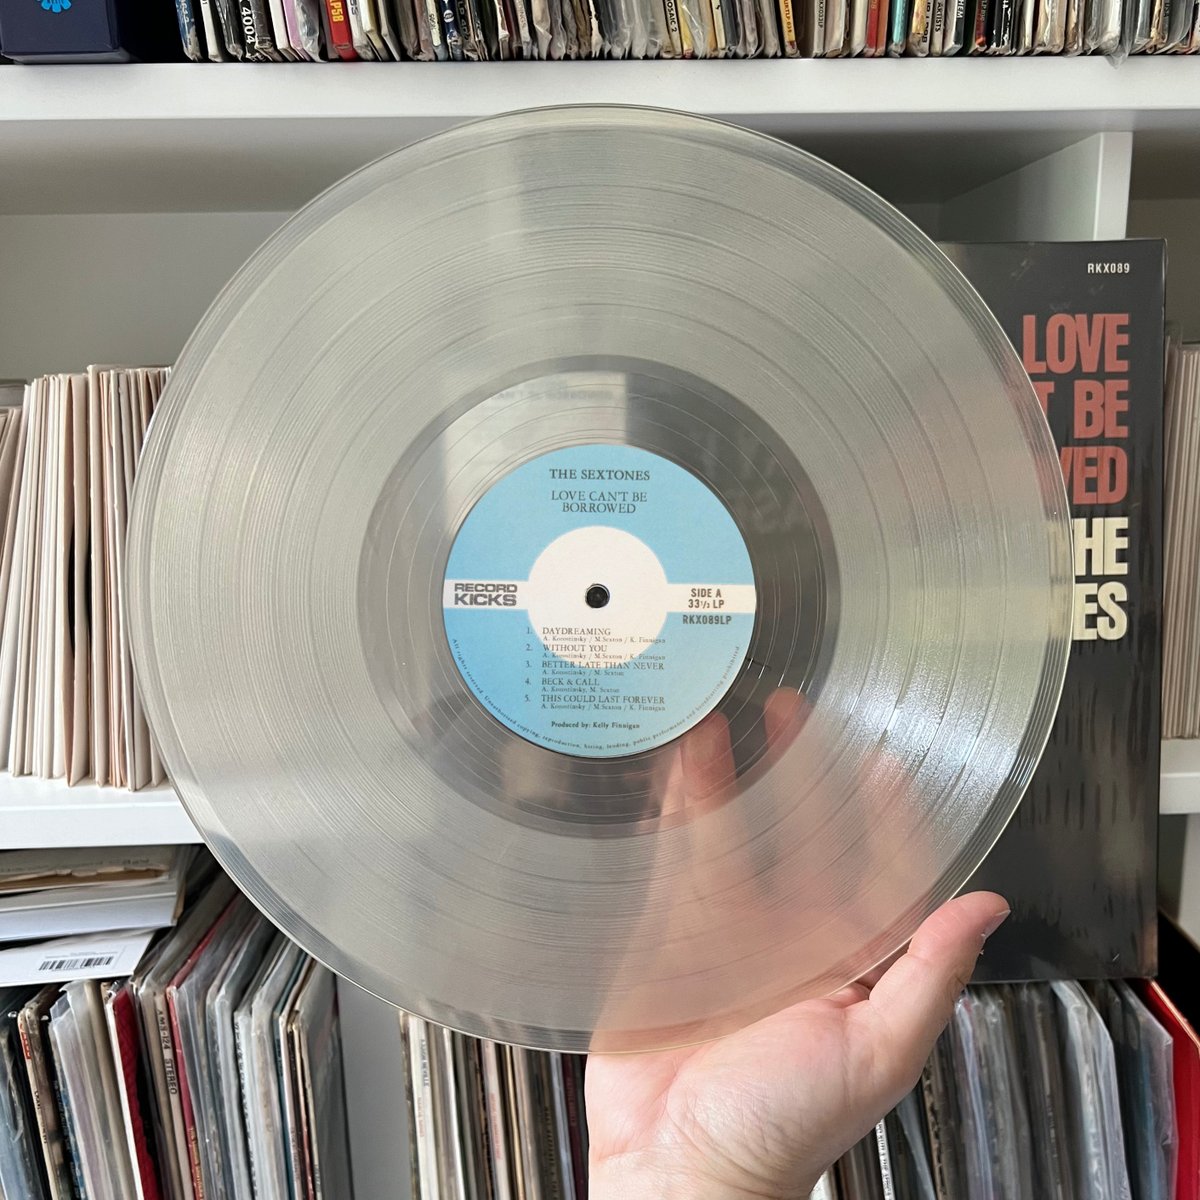 #TheSextones’ “Love Can’t Be Borrowed” LP produced by @misterfinnigan is back in stock 🔥 The LP rapidly went sold out and by popular demand it’s now once again available: pre-order the new ltd ed clear LP out May 24th. 500 copies only, don’t sleep on it! found.ee/RKX089LP